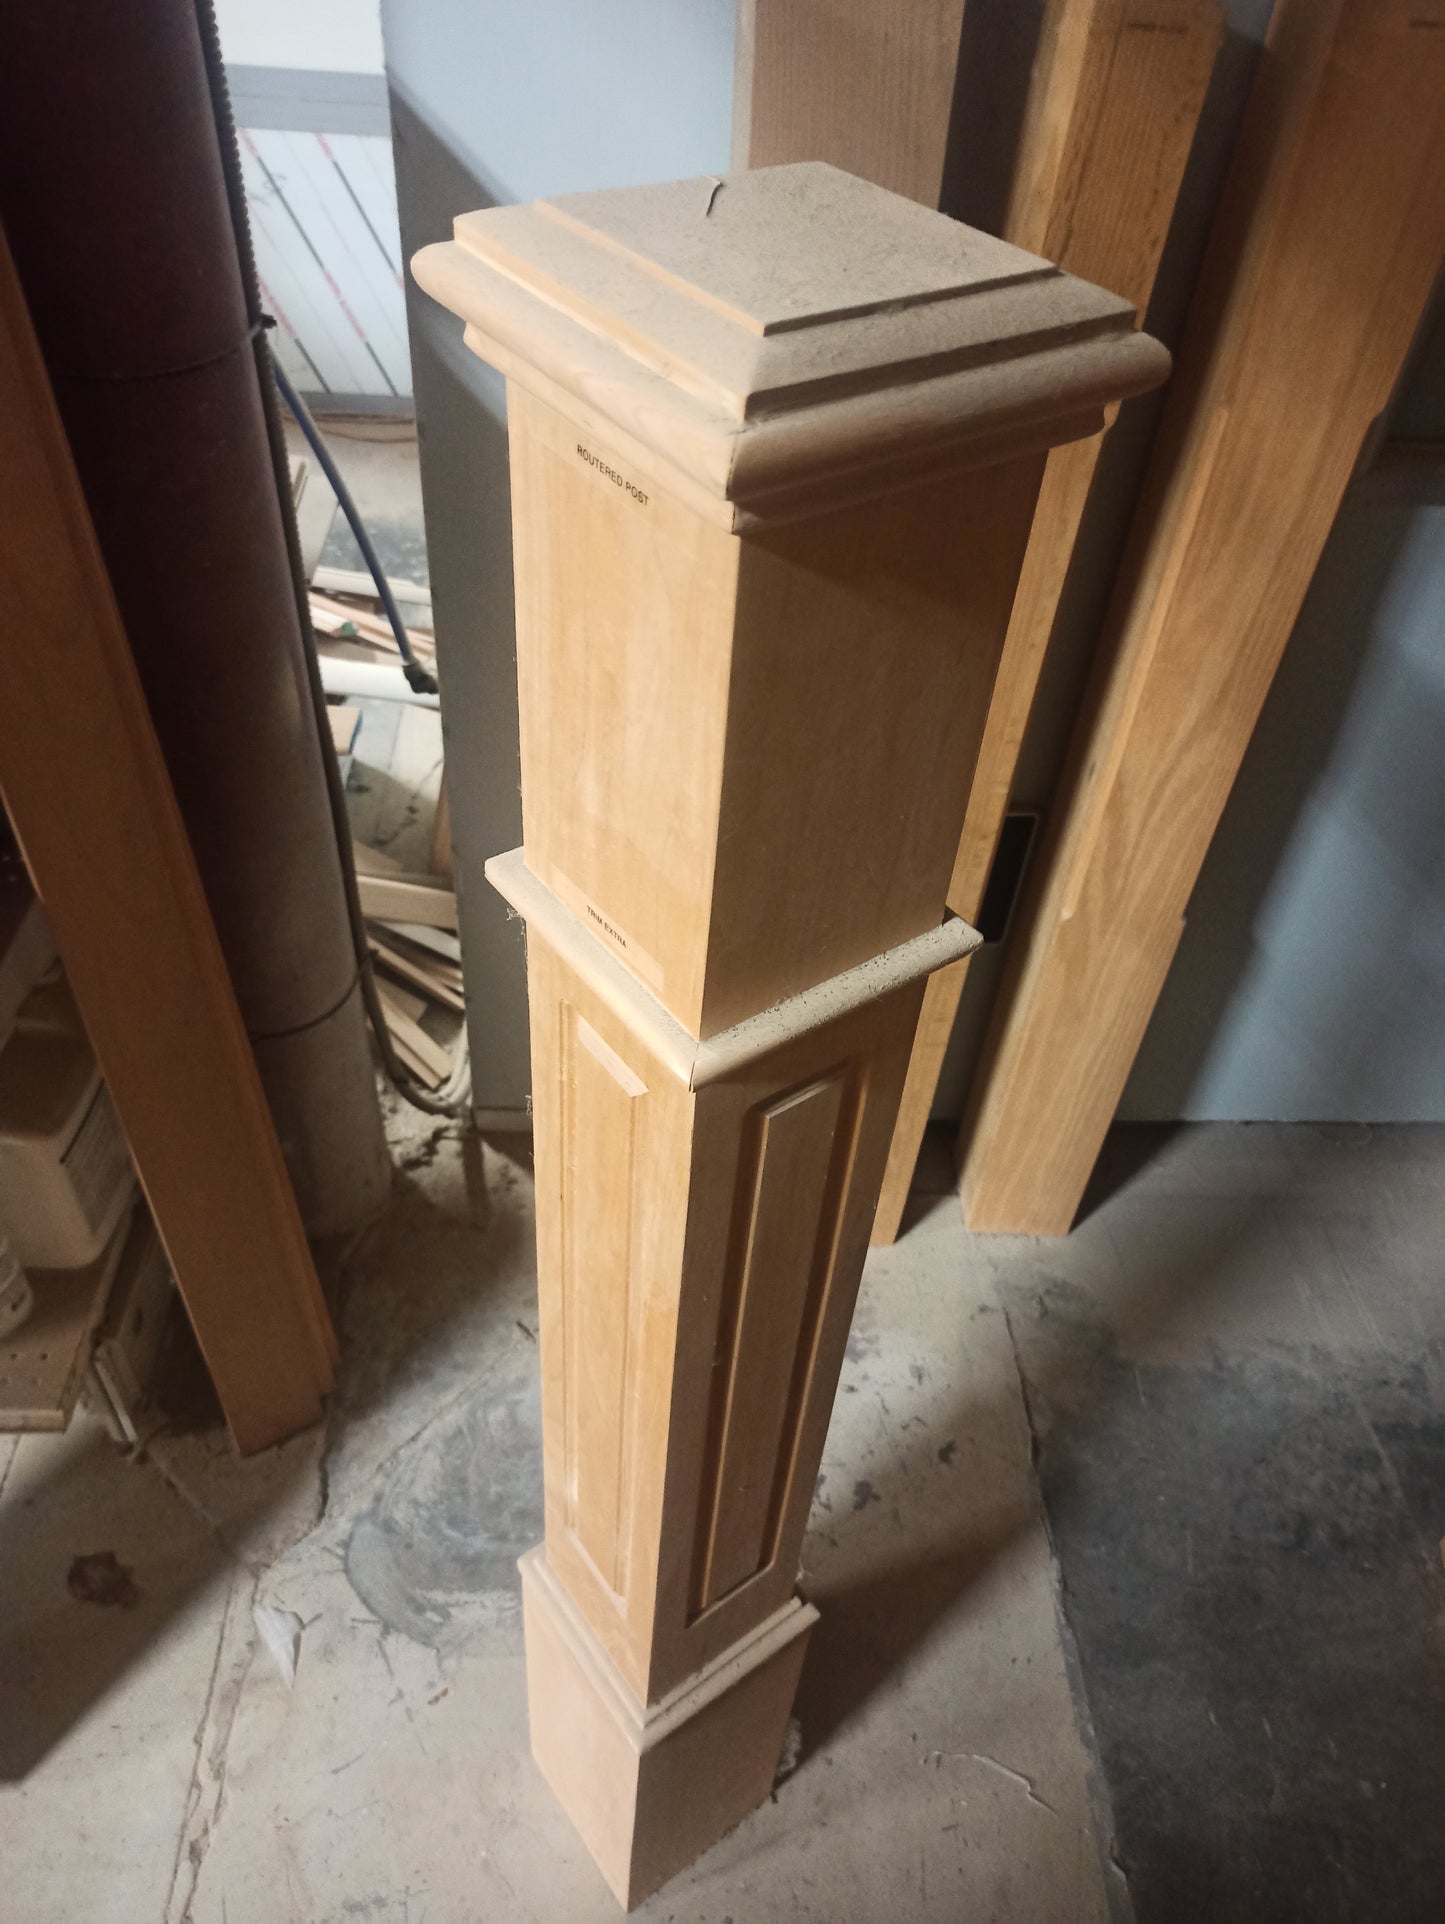 (18155) LARGE ROUTER POST WITH CAP BASE AND TOP TRIM